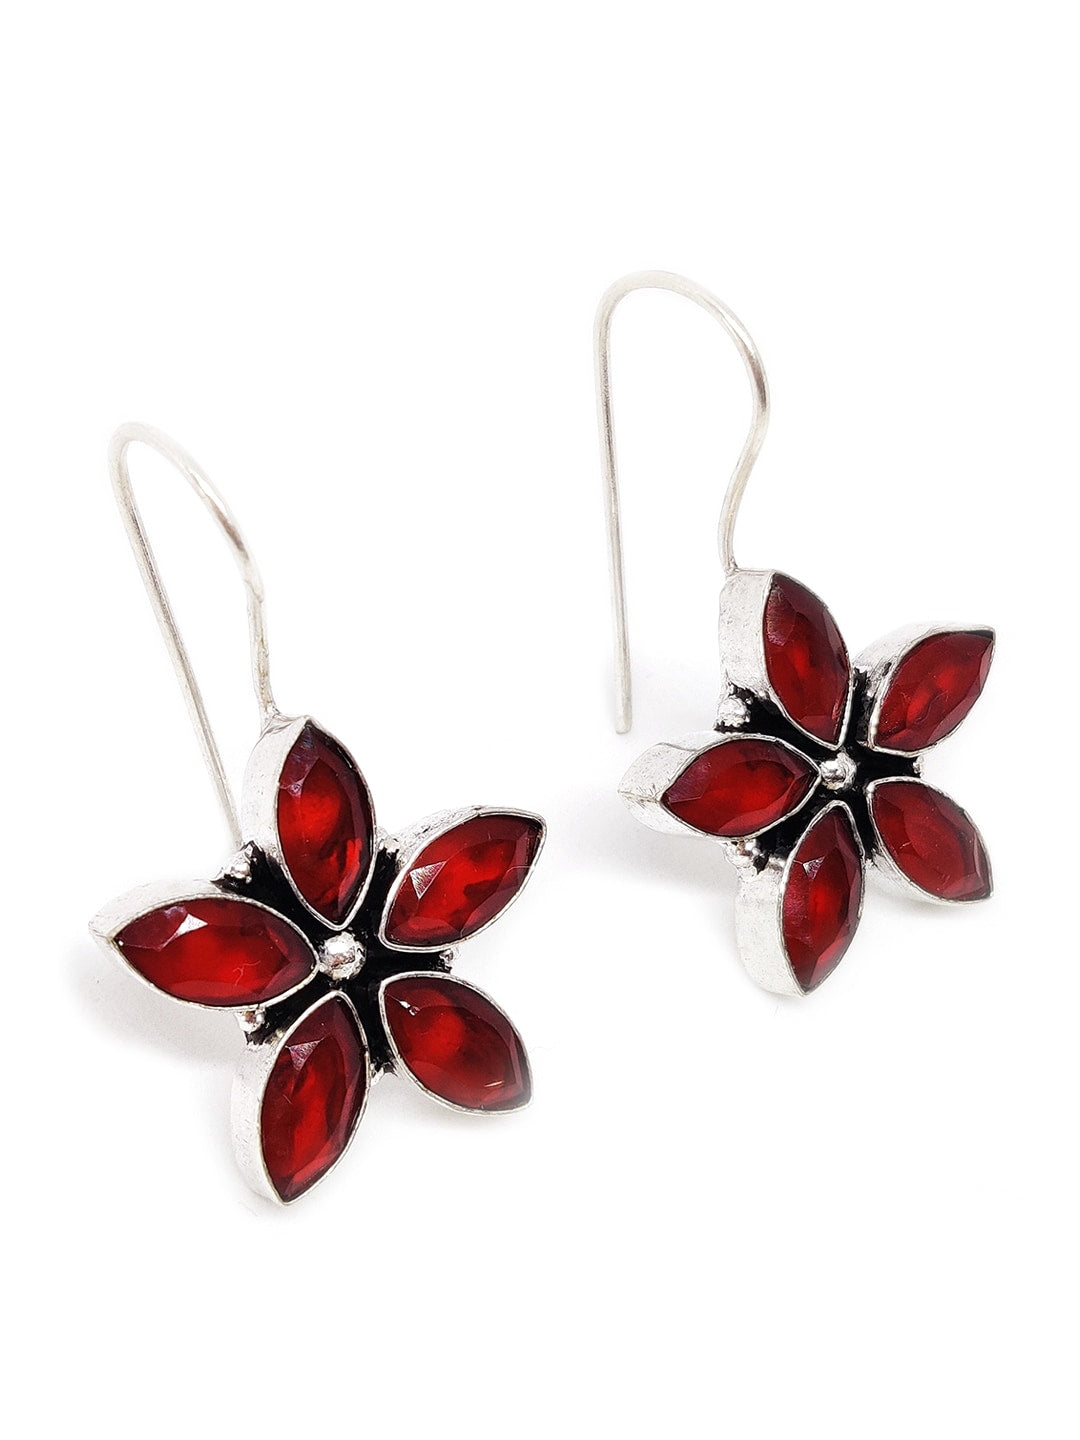 EL REGALO Red Floral German Silver Drop Earrings - for Women and Girls
Style ID: 16770276